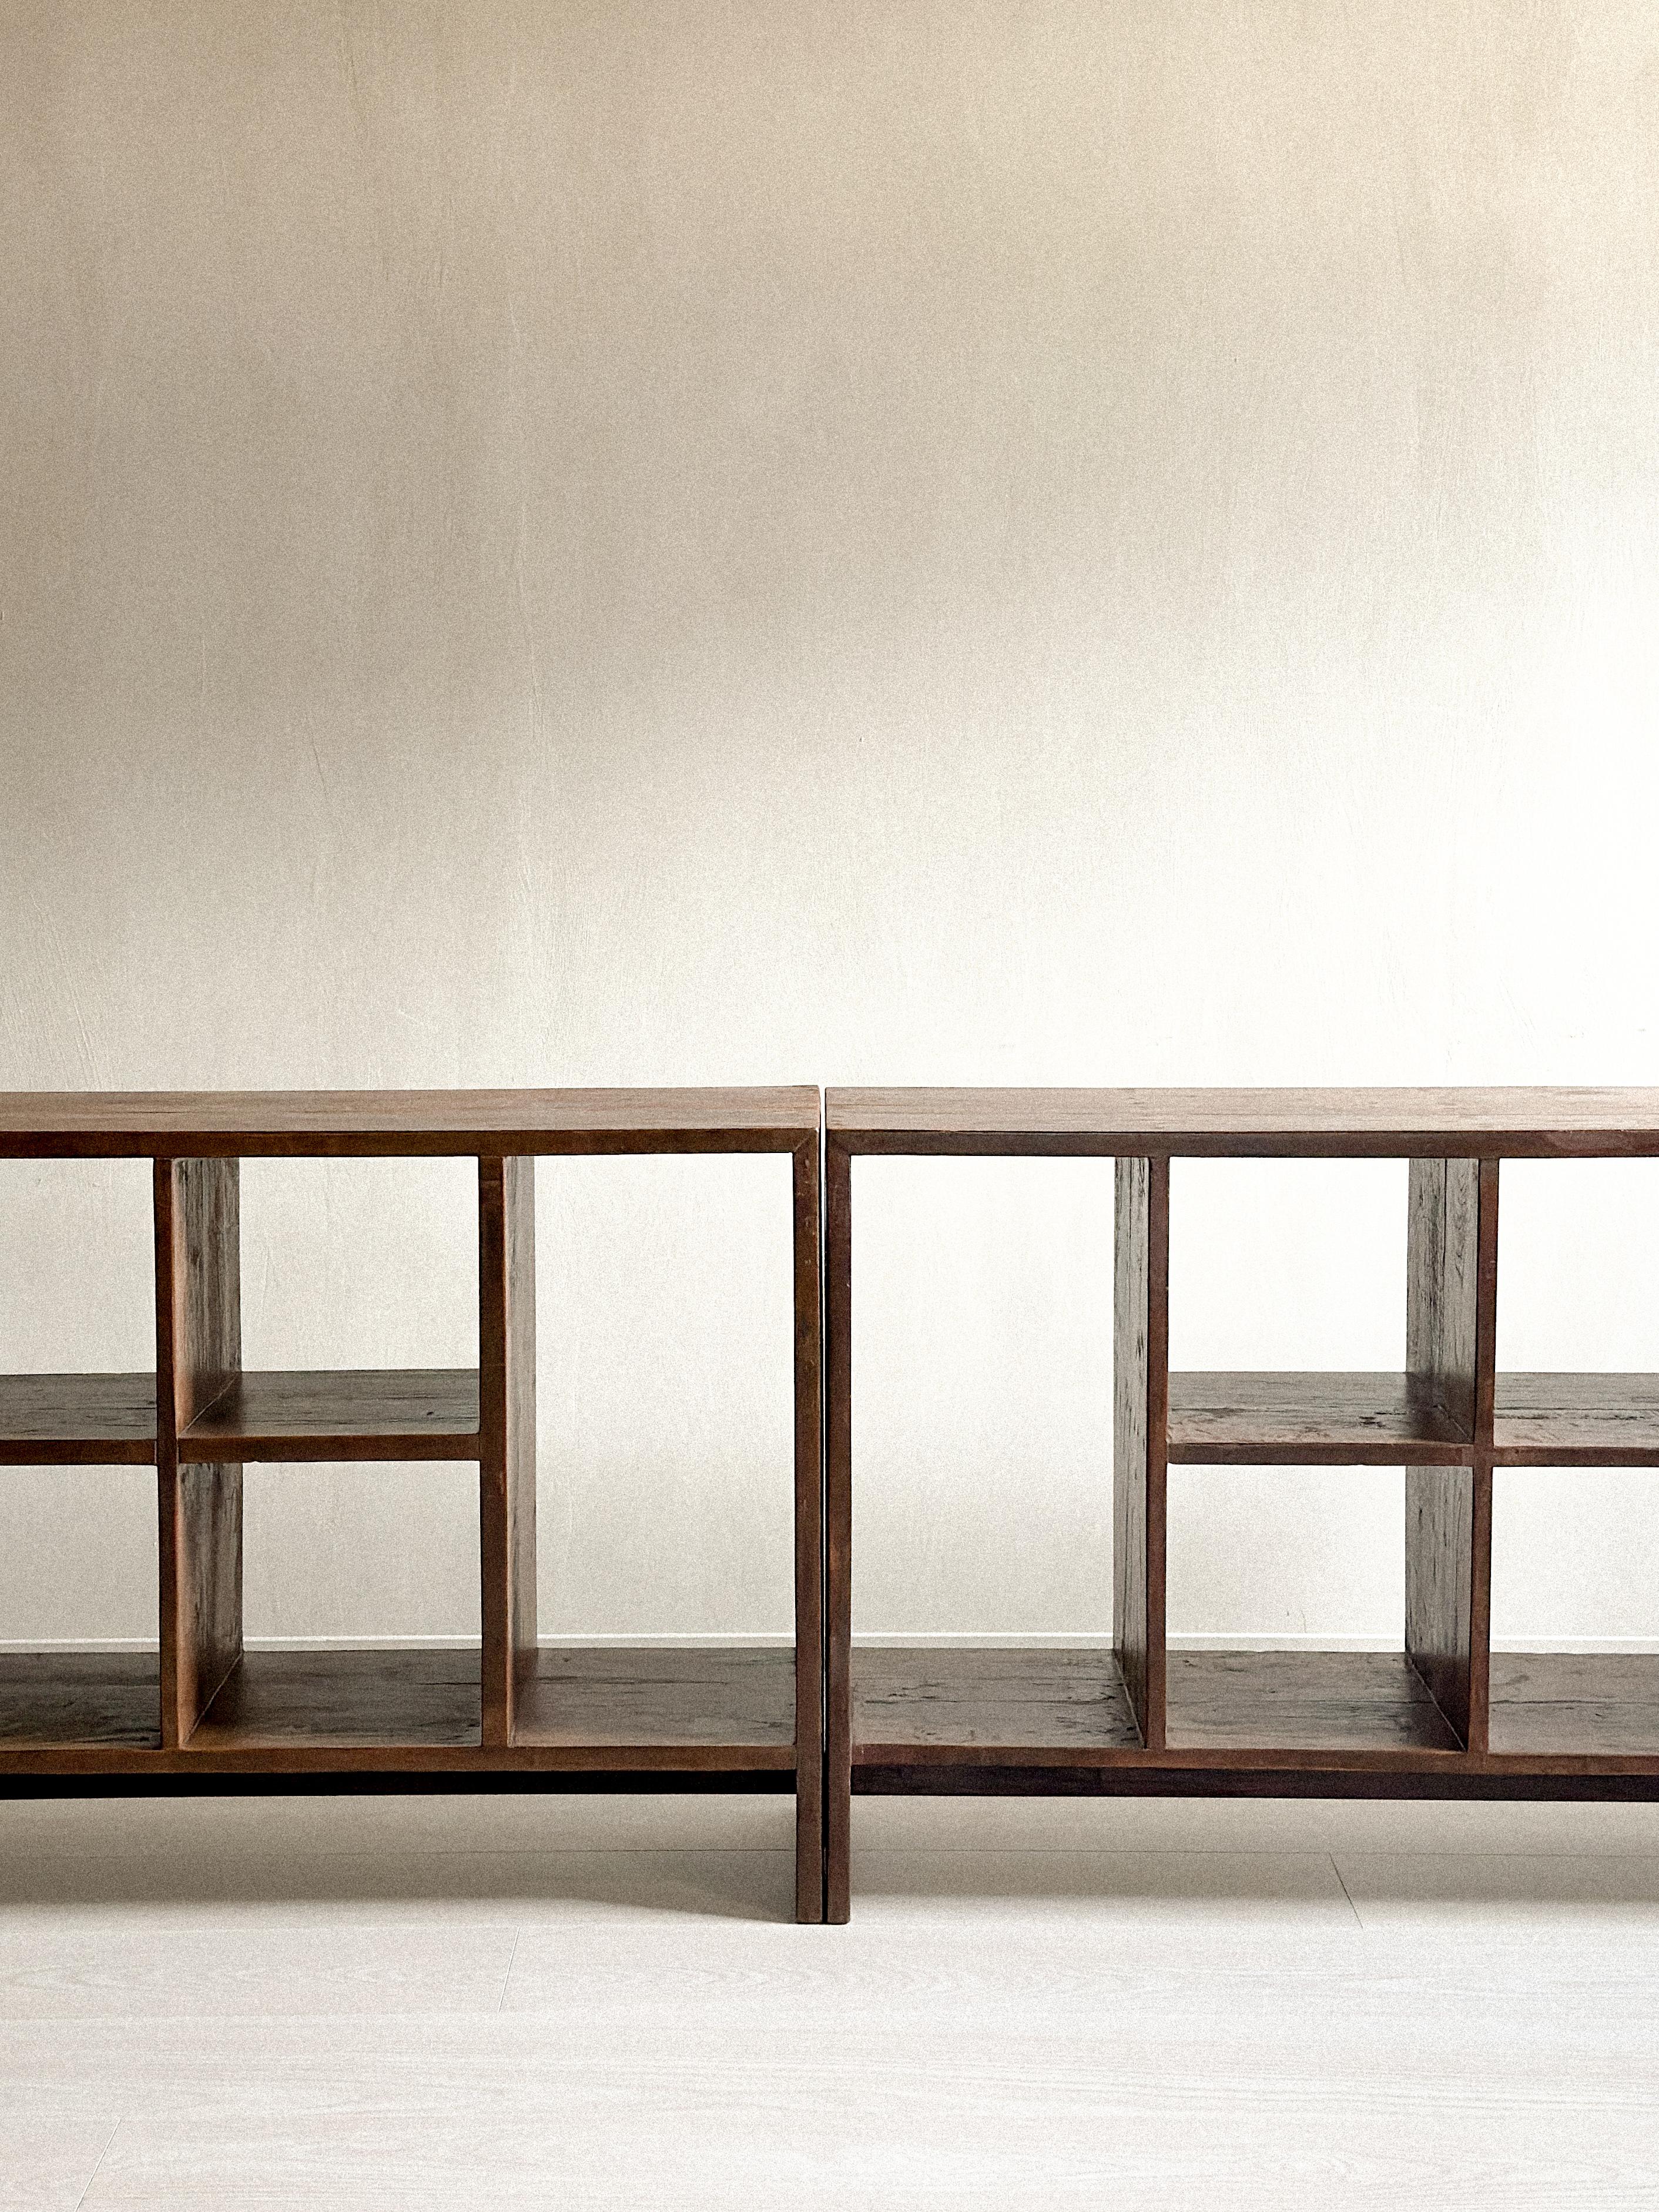 Indian A Pair of Pierre Jeanneret '1896-1967' 'PJ-R-27-A' File Racks, India, 1950s For Sale